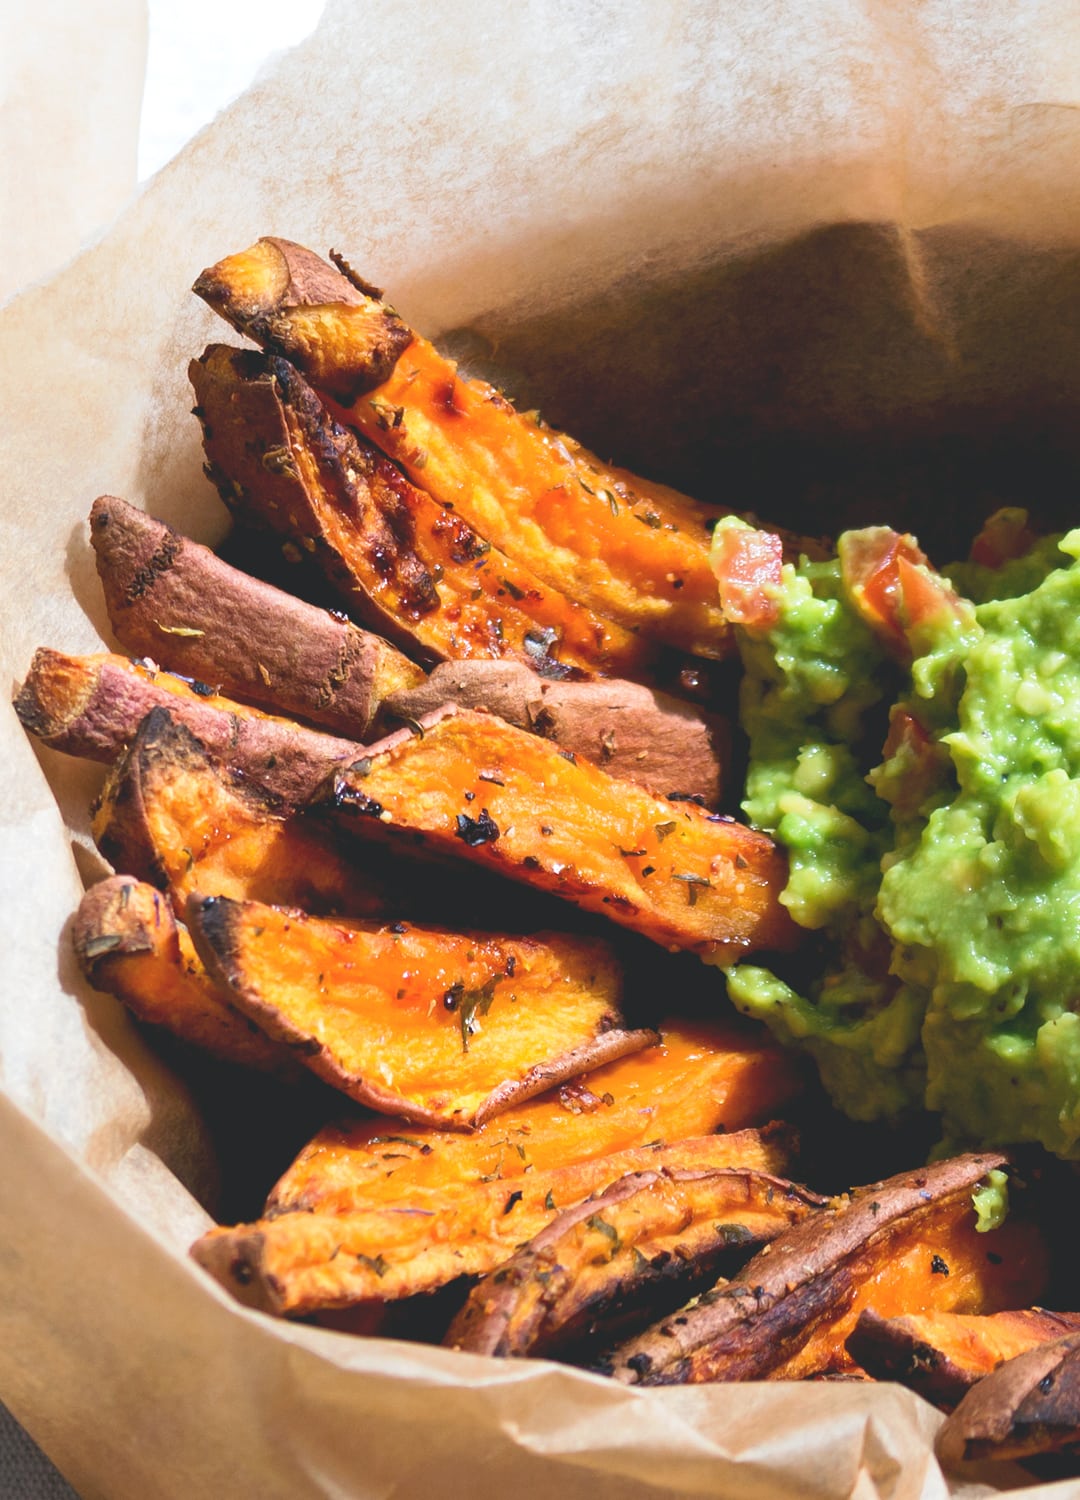 Sweet Potato Fries with Guacamole - delicious side dish, snack or main course! I love this recipe. Sweet potato fries are so delicious and actually good for you! | thehealthfulideas.com